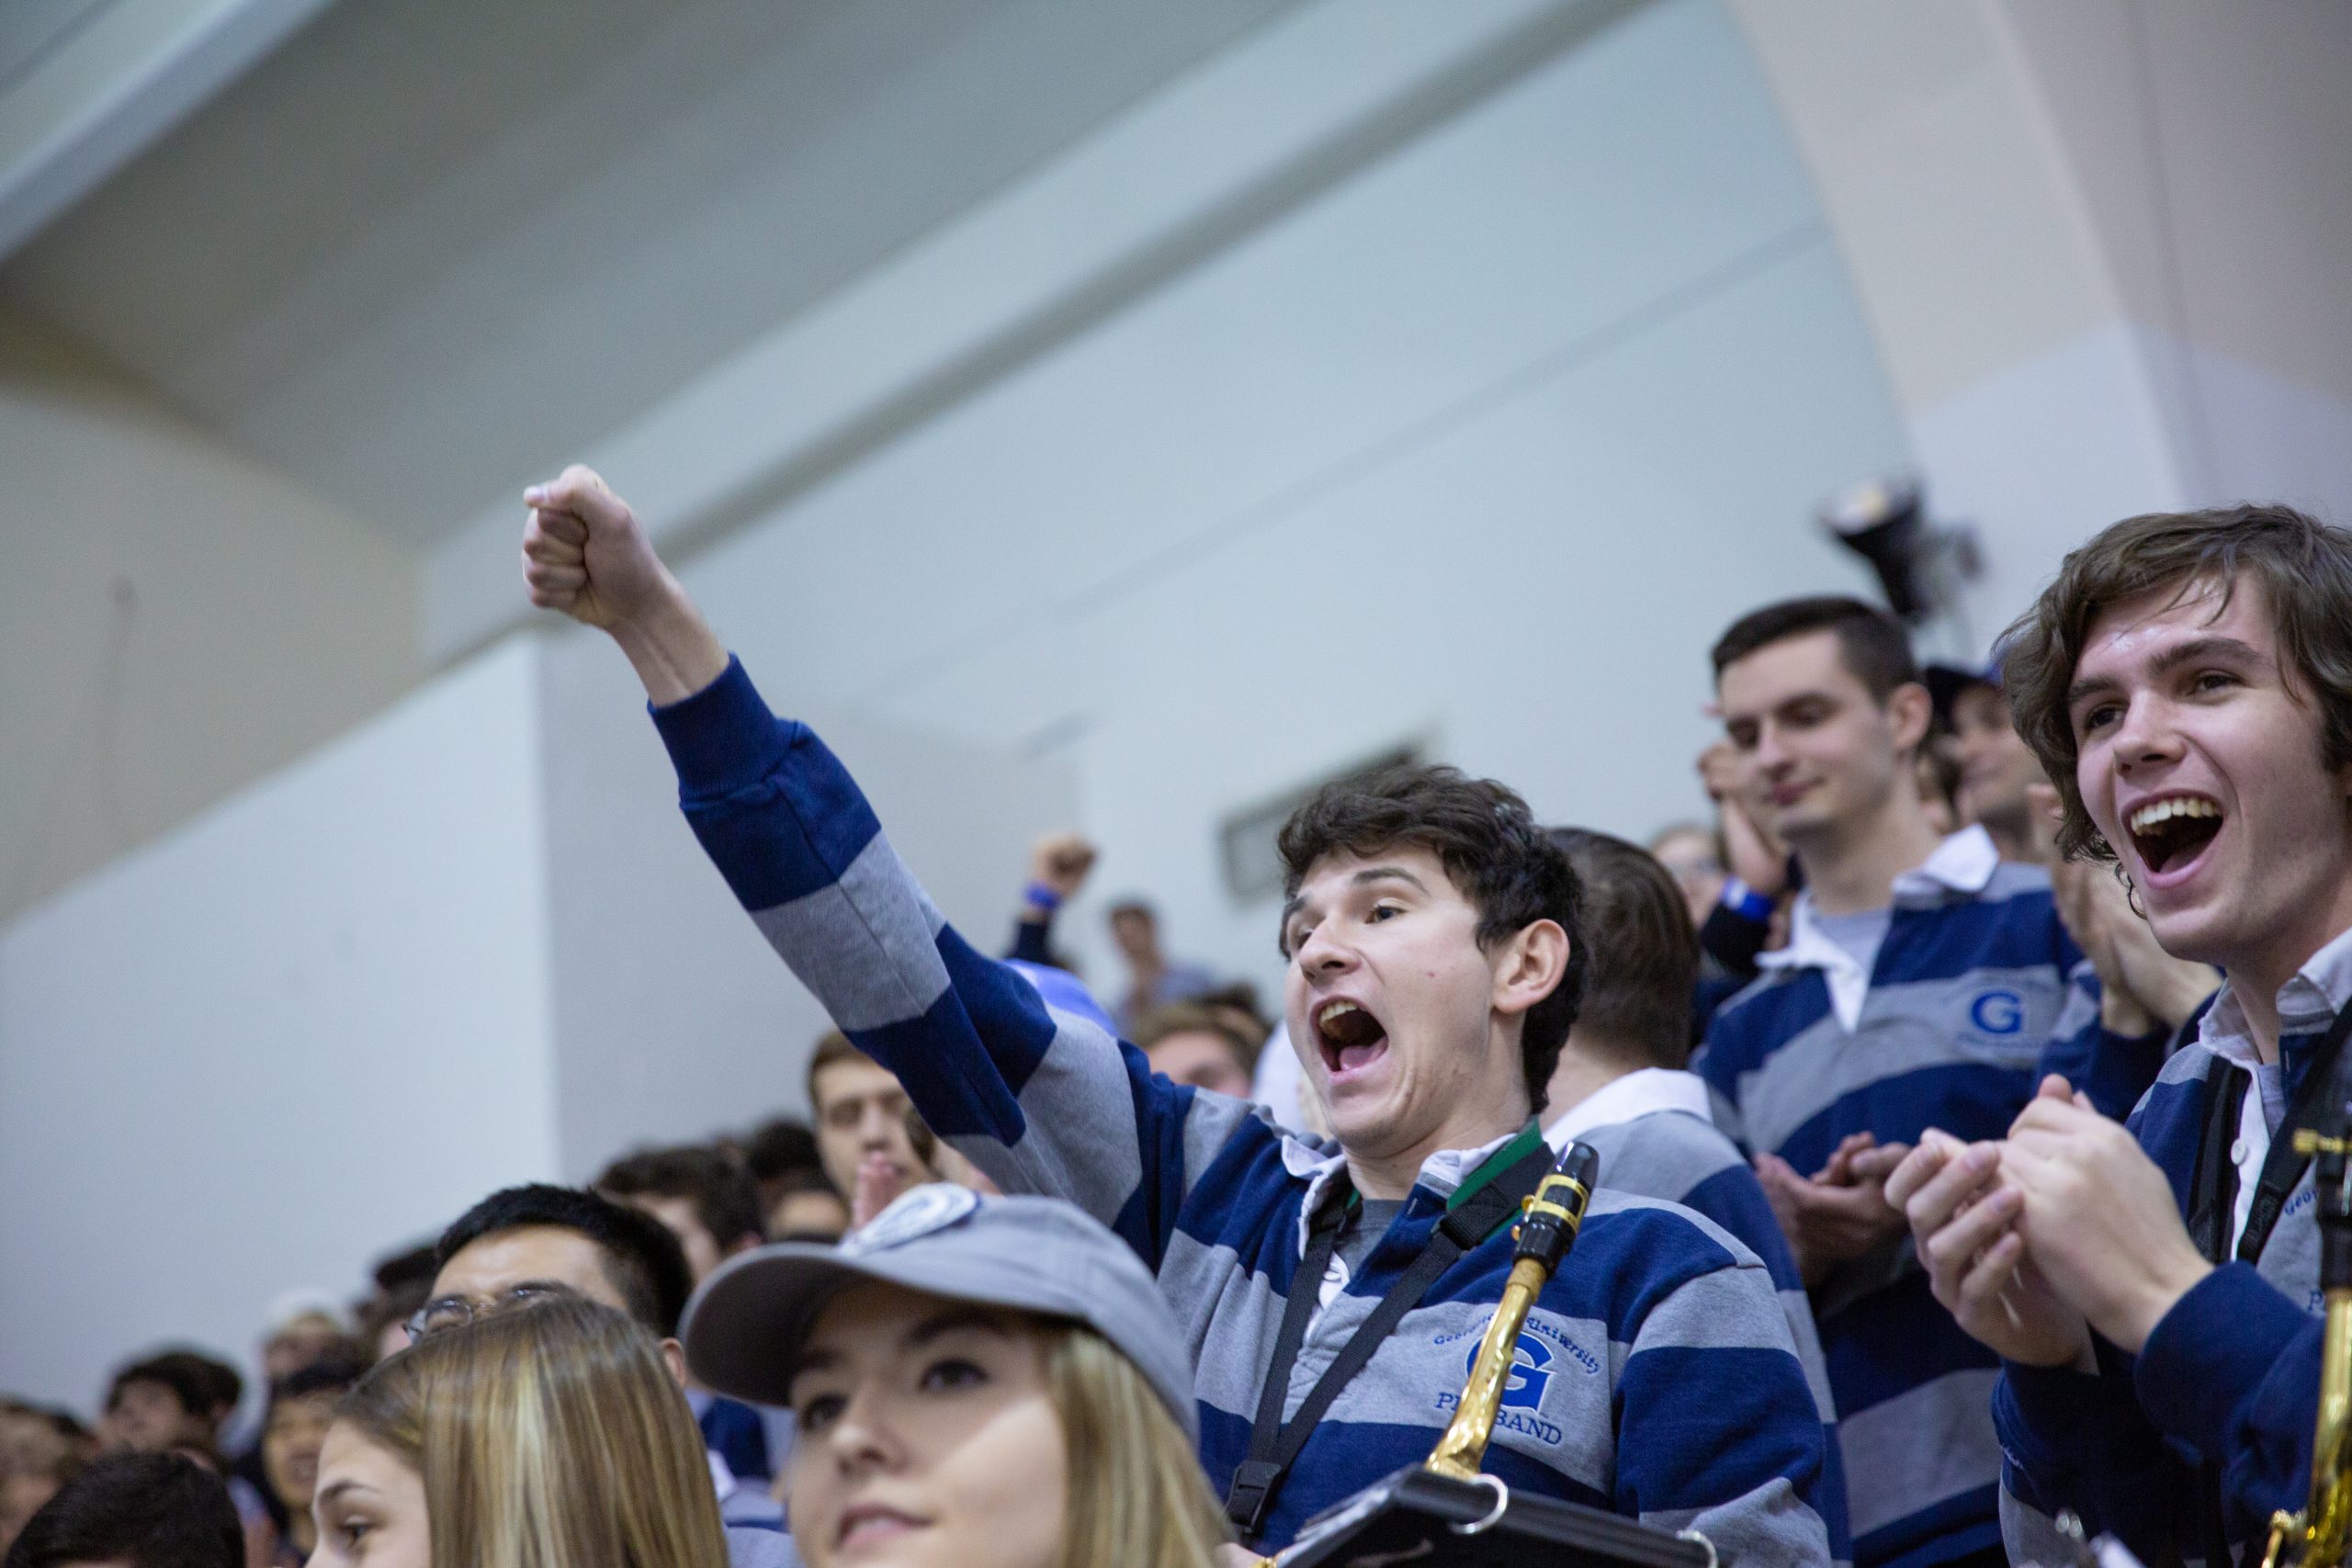 A member of the Pep Band shouts and raises his arm out to cheer on Georgetown's basketball team at a 2019 game.